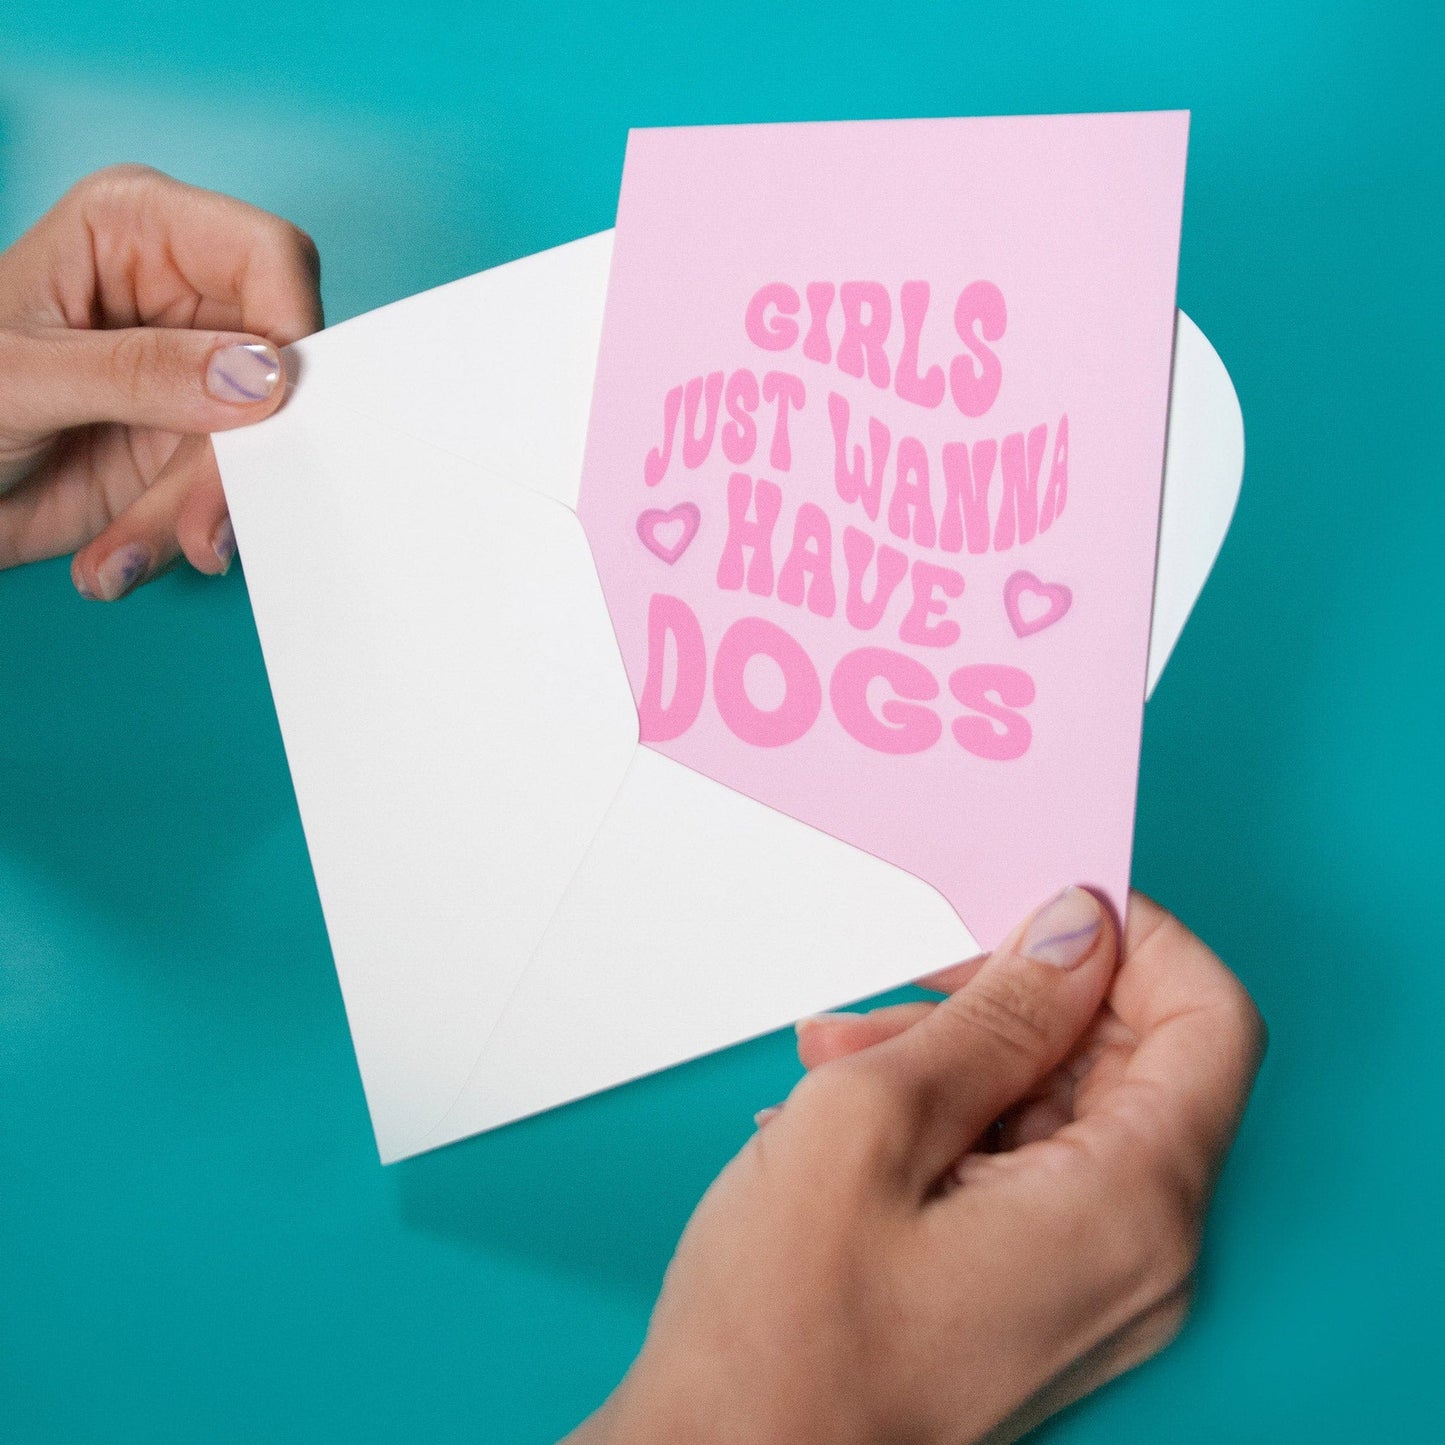 Greeting card "Girls just wanna have dogs" pink